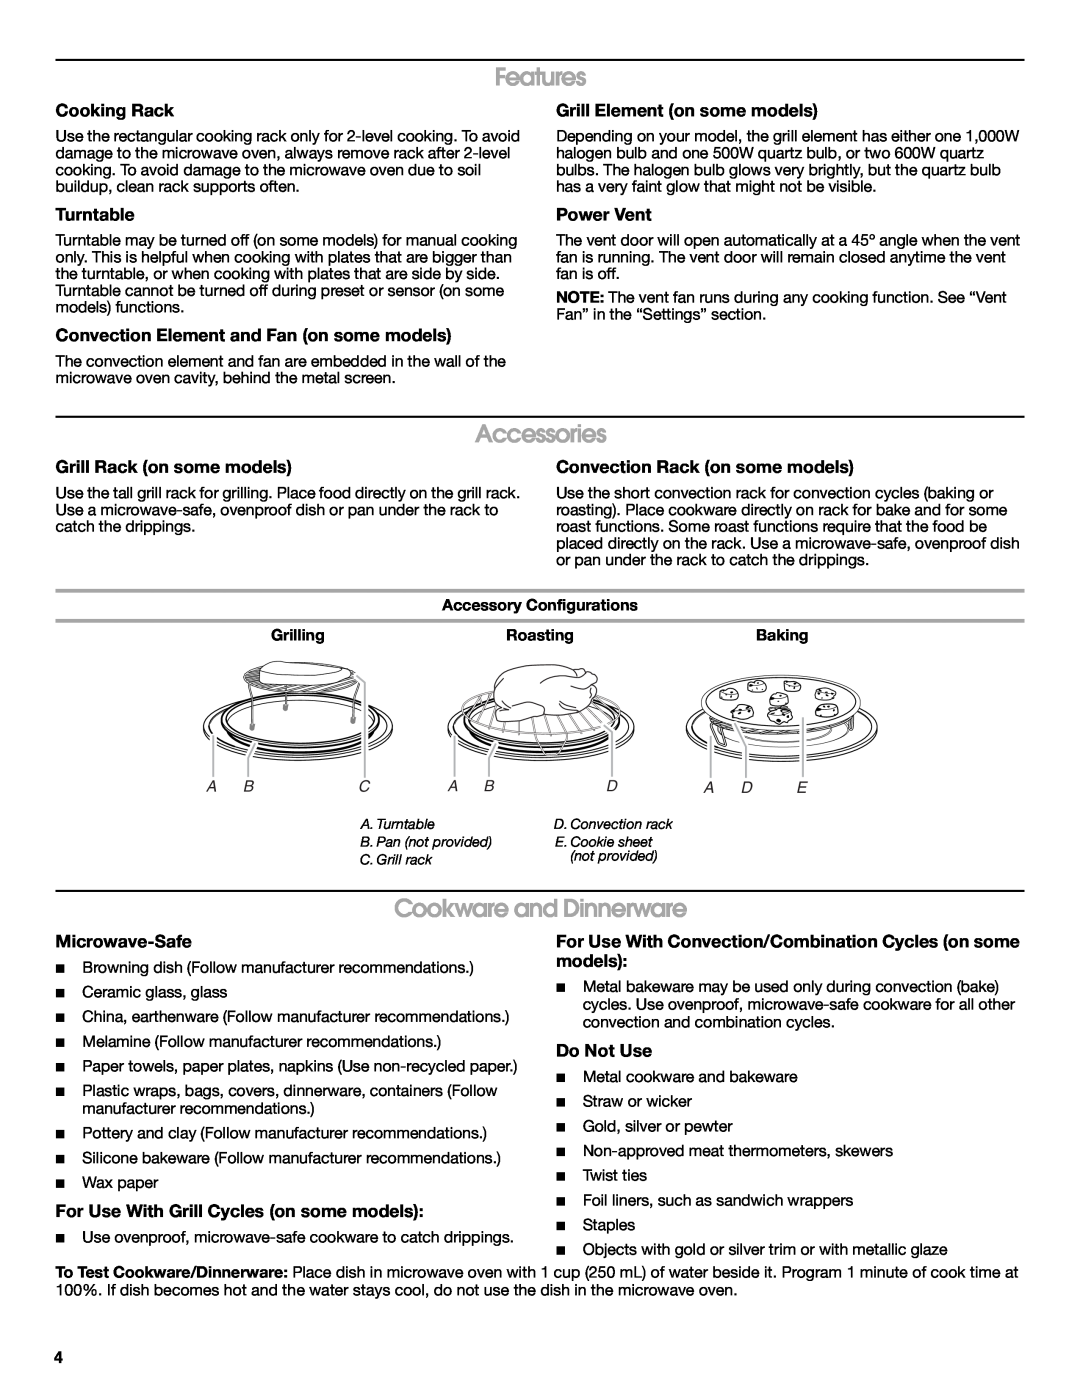 Jenn-Air W10285189B important safety instructions Features, Accessories, Cookware and Dinnerware 